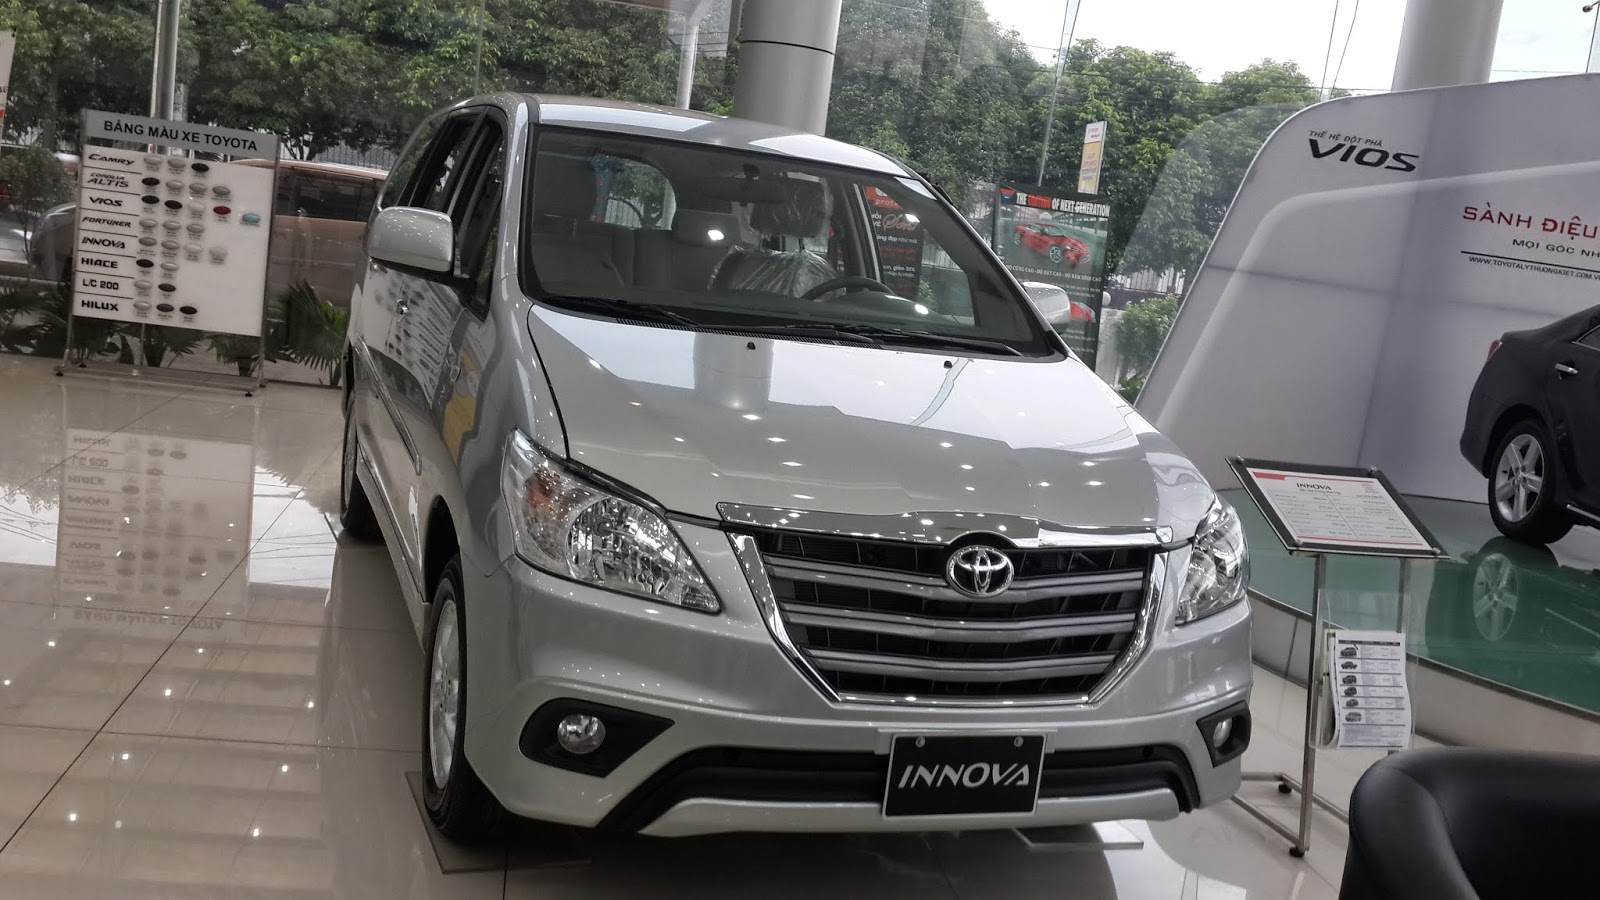 Bán xe Toyota Innova, Camry, Vios, Fortuner, Yaris, HIlux, Altis, HIace... - 3